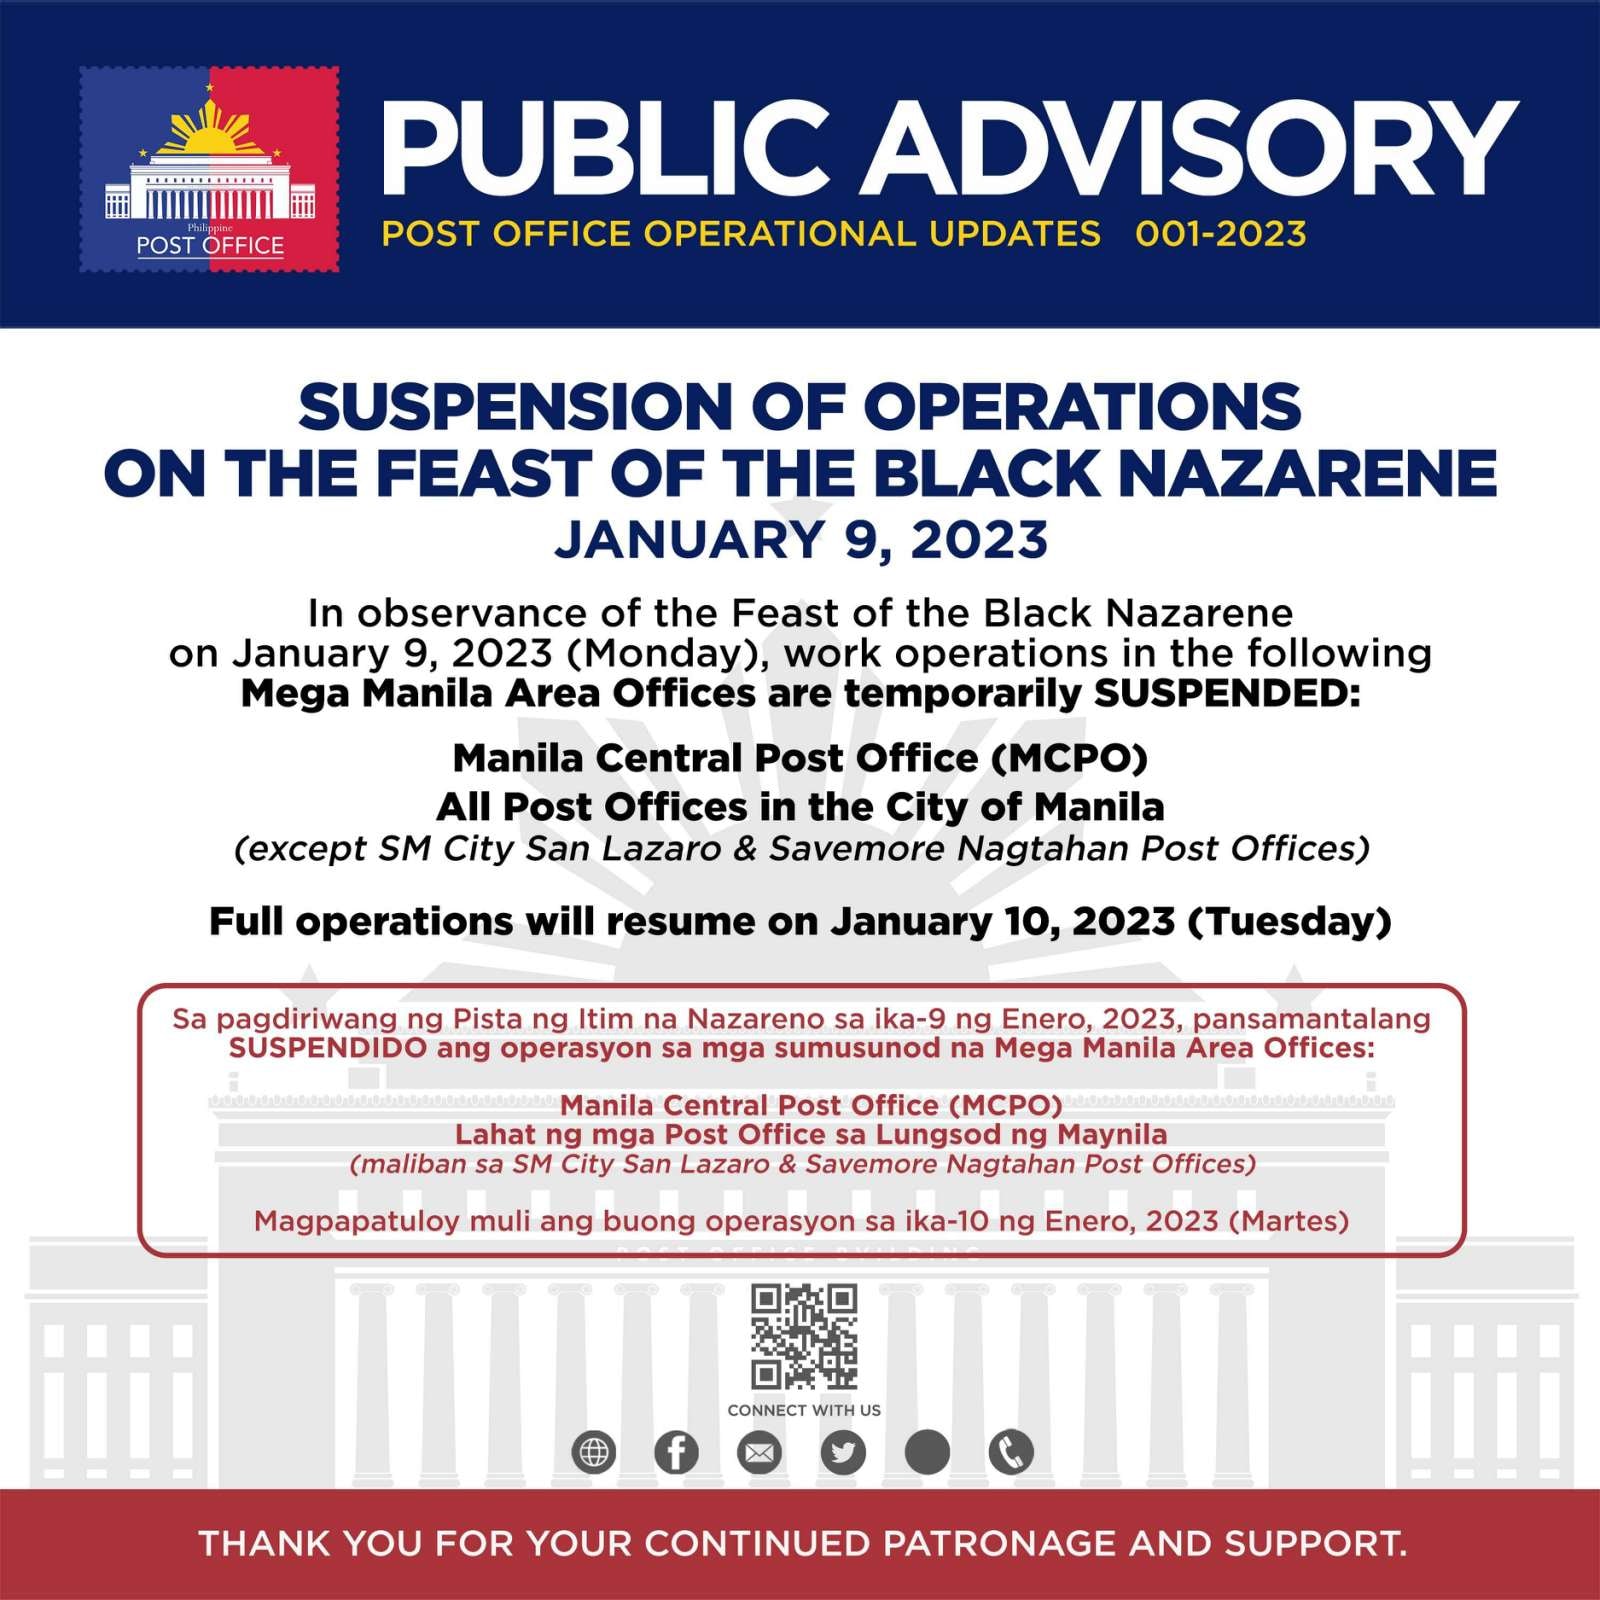 Suspension of Operations on the feast of Black Nazarene